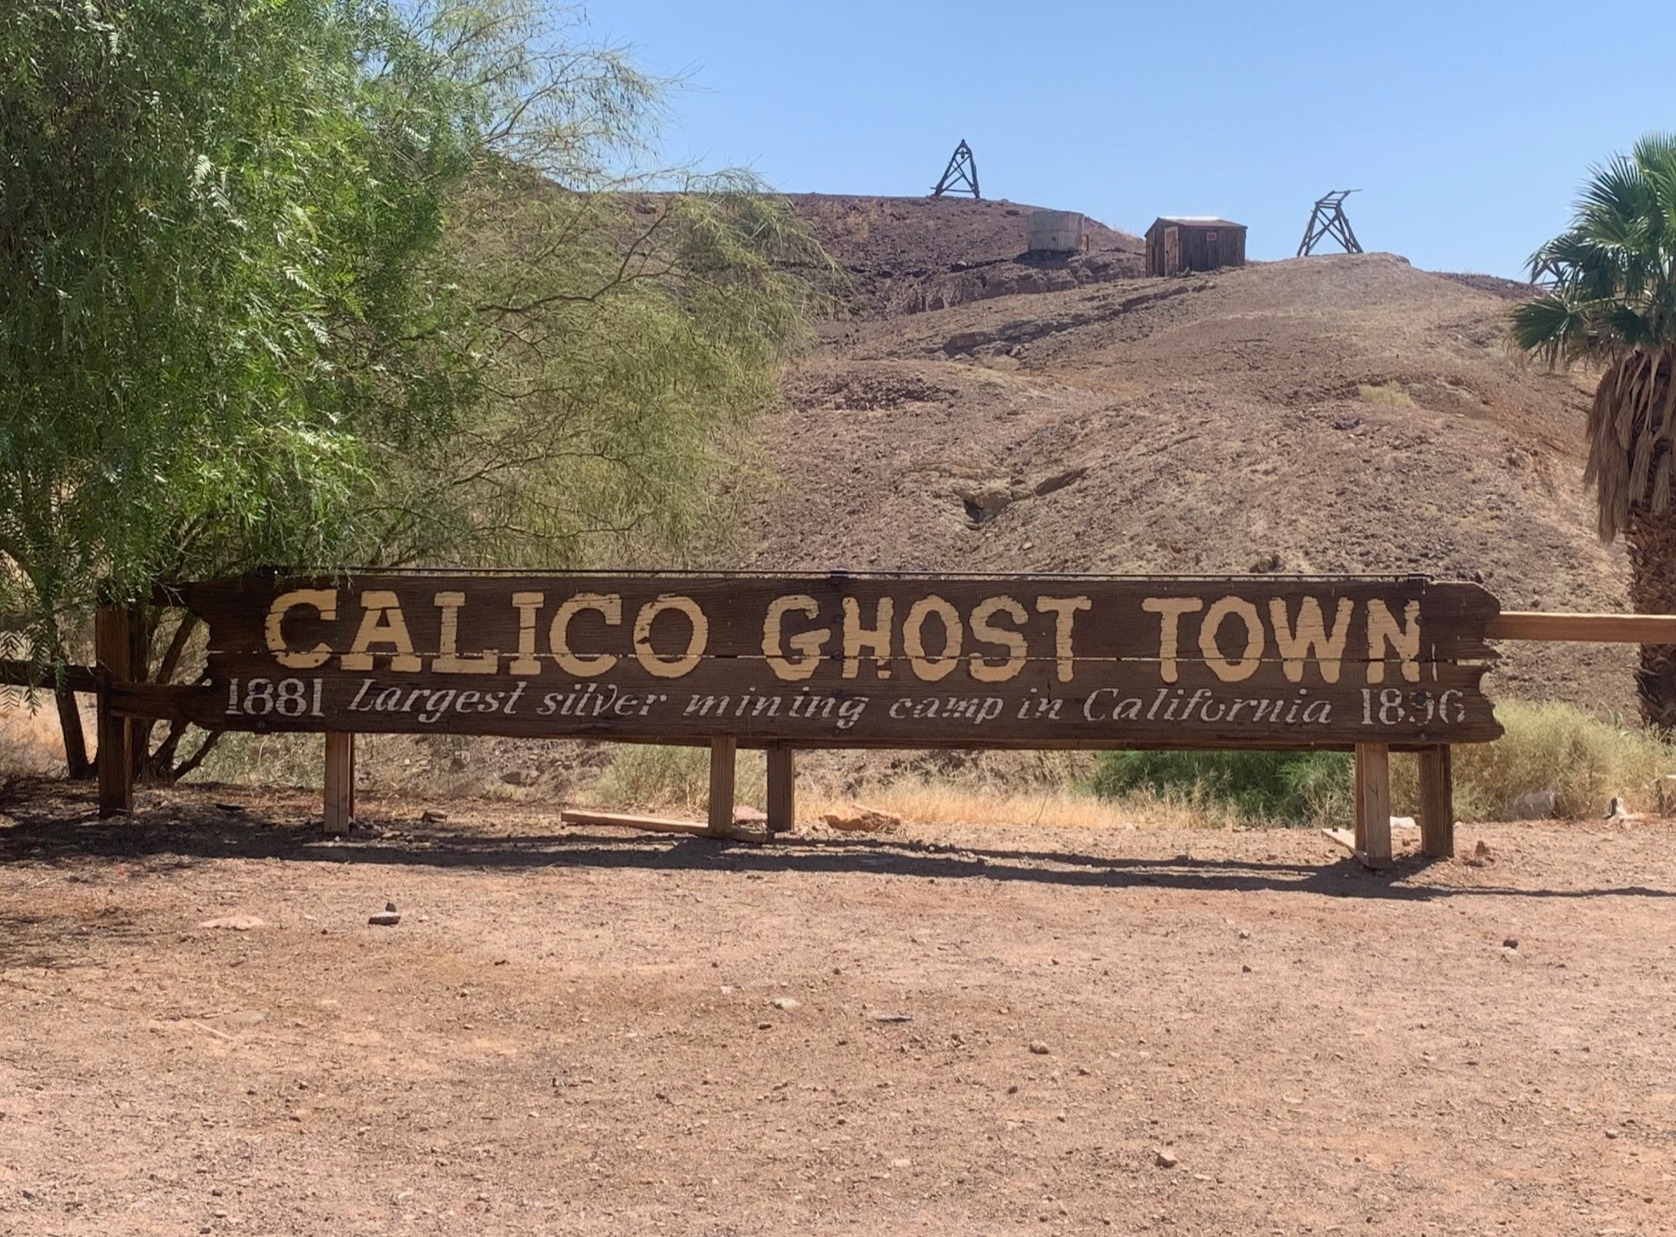 Calico ghost town in Yermo CA